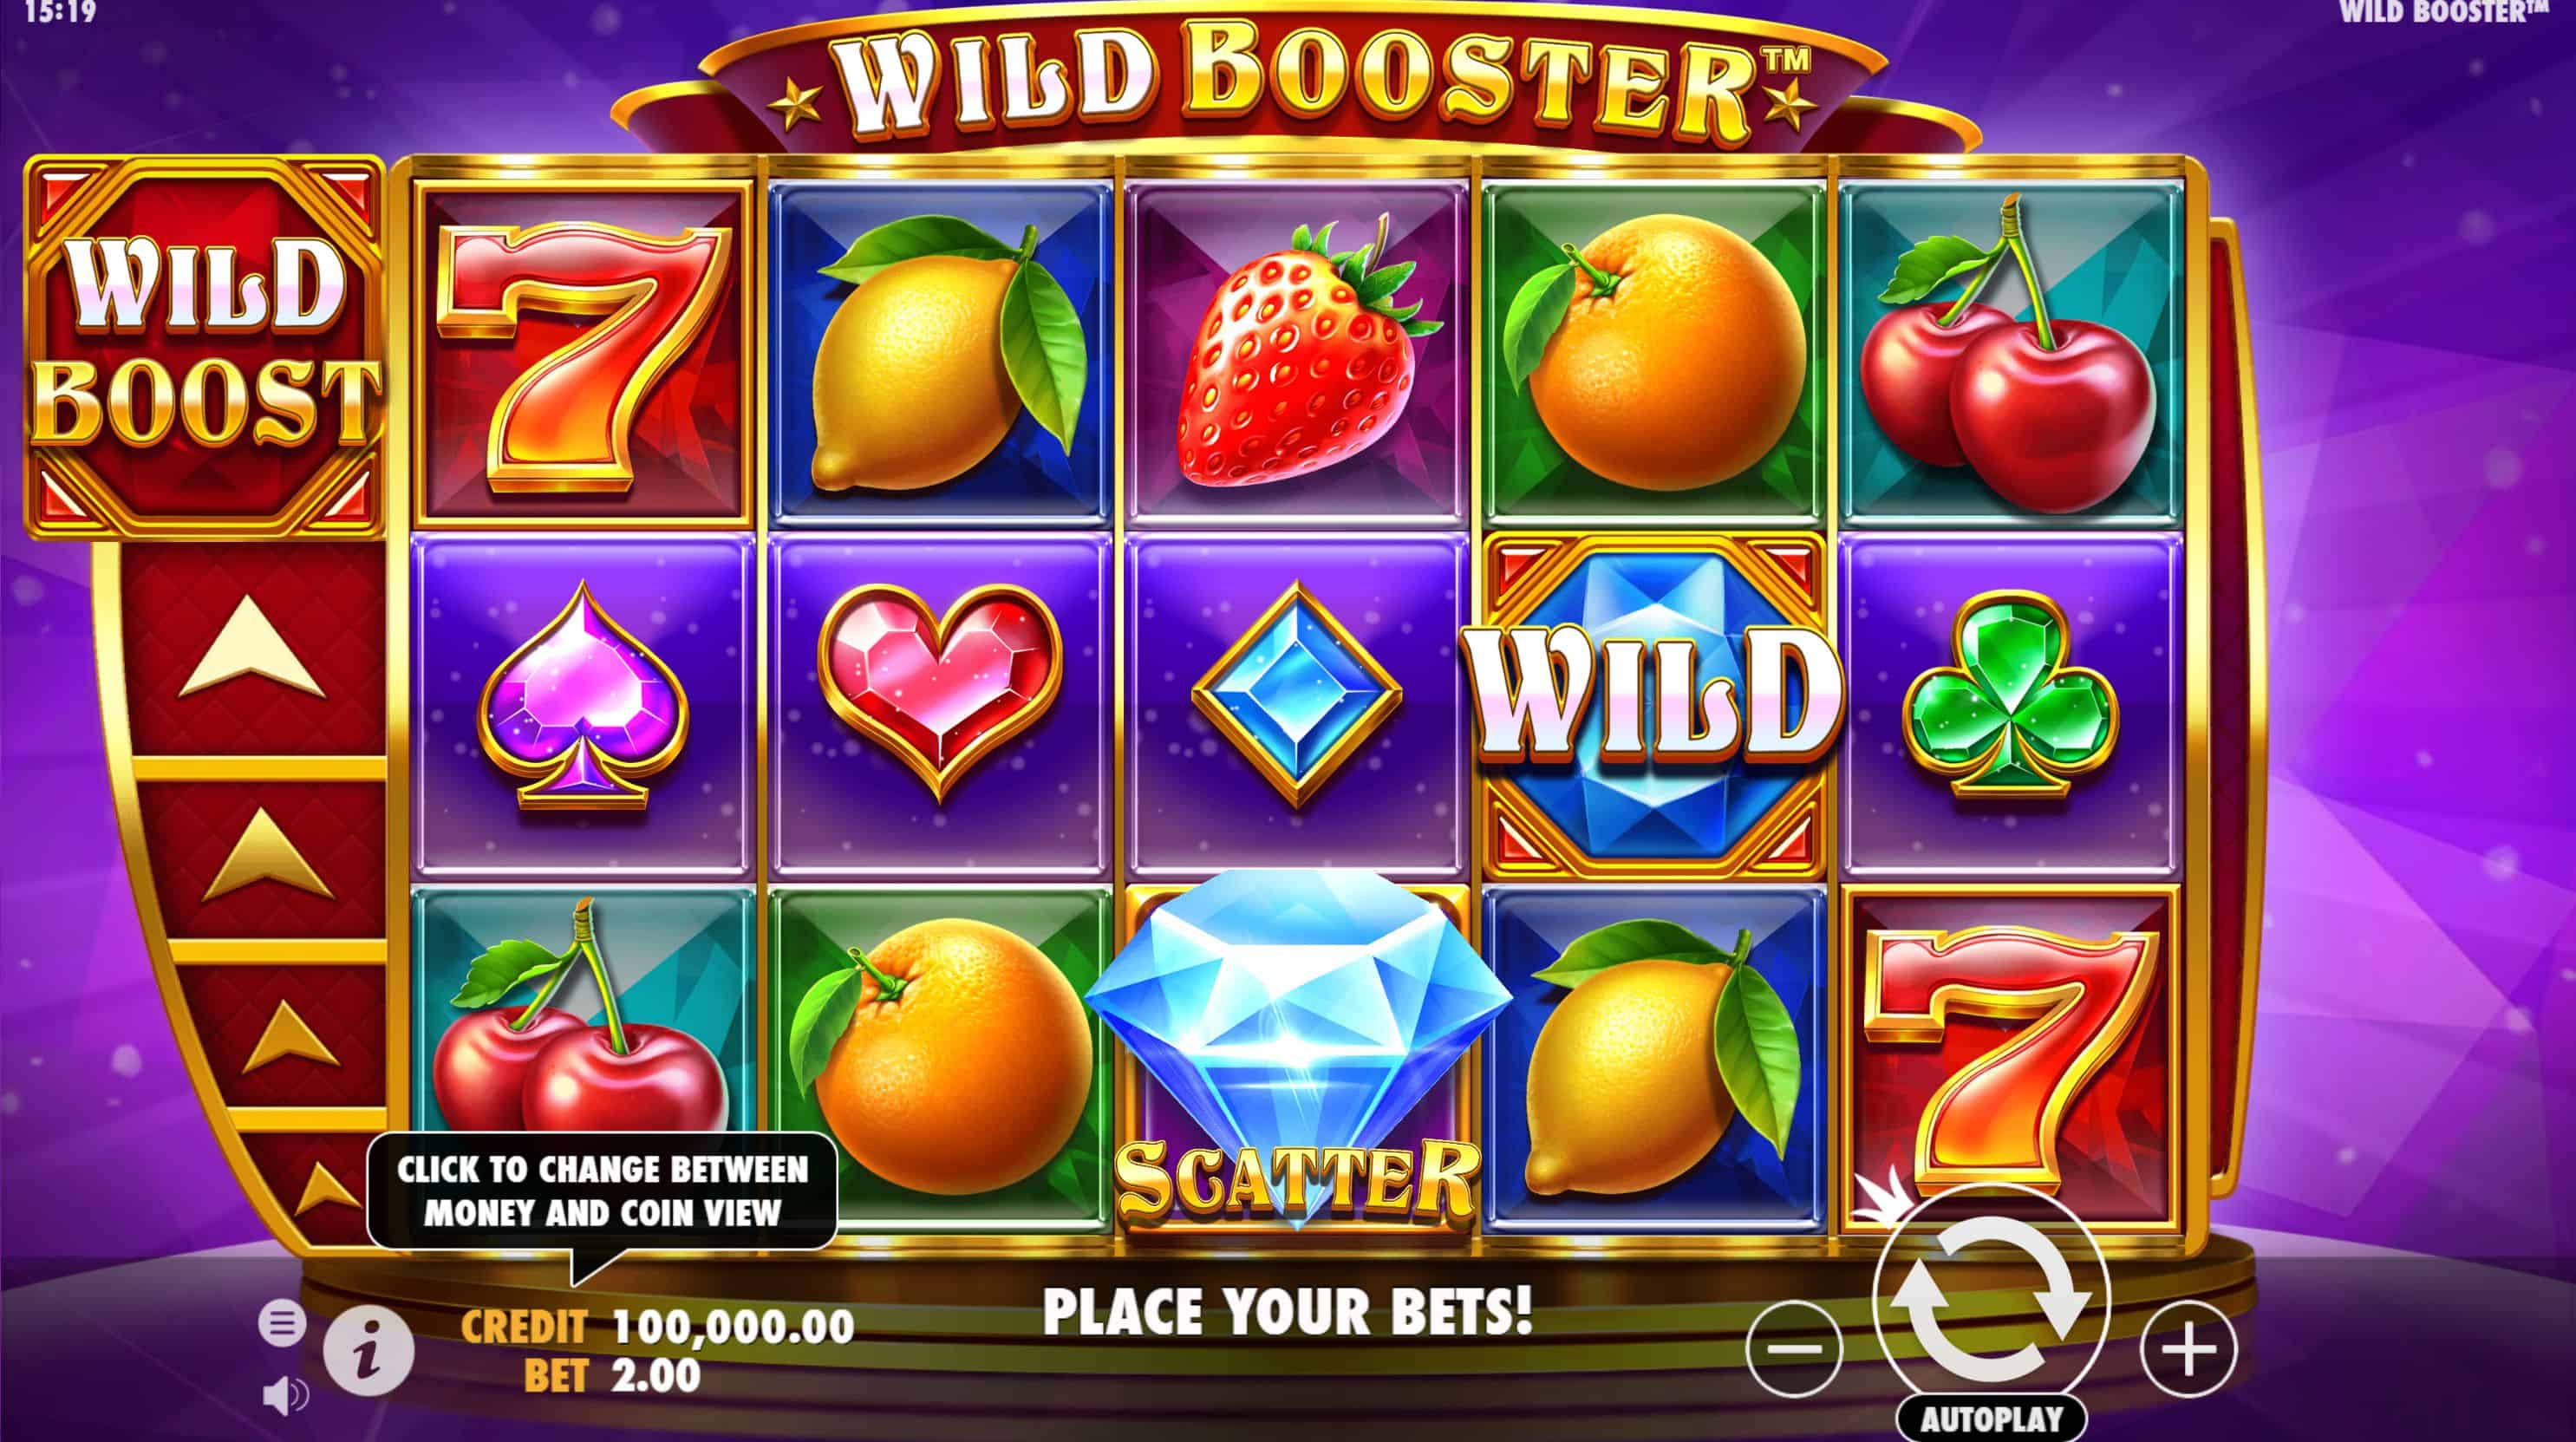 Wild Booster Slot Game Free Play at Casino Ireland 01